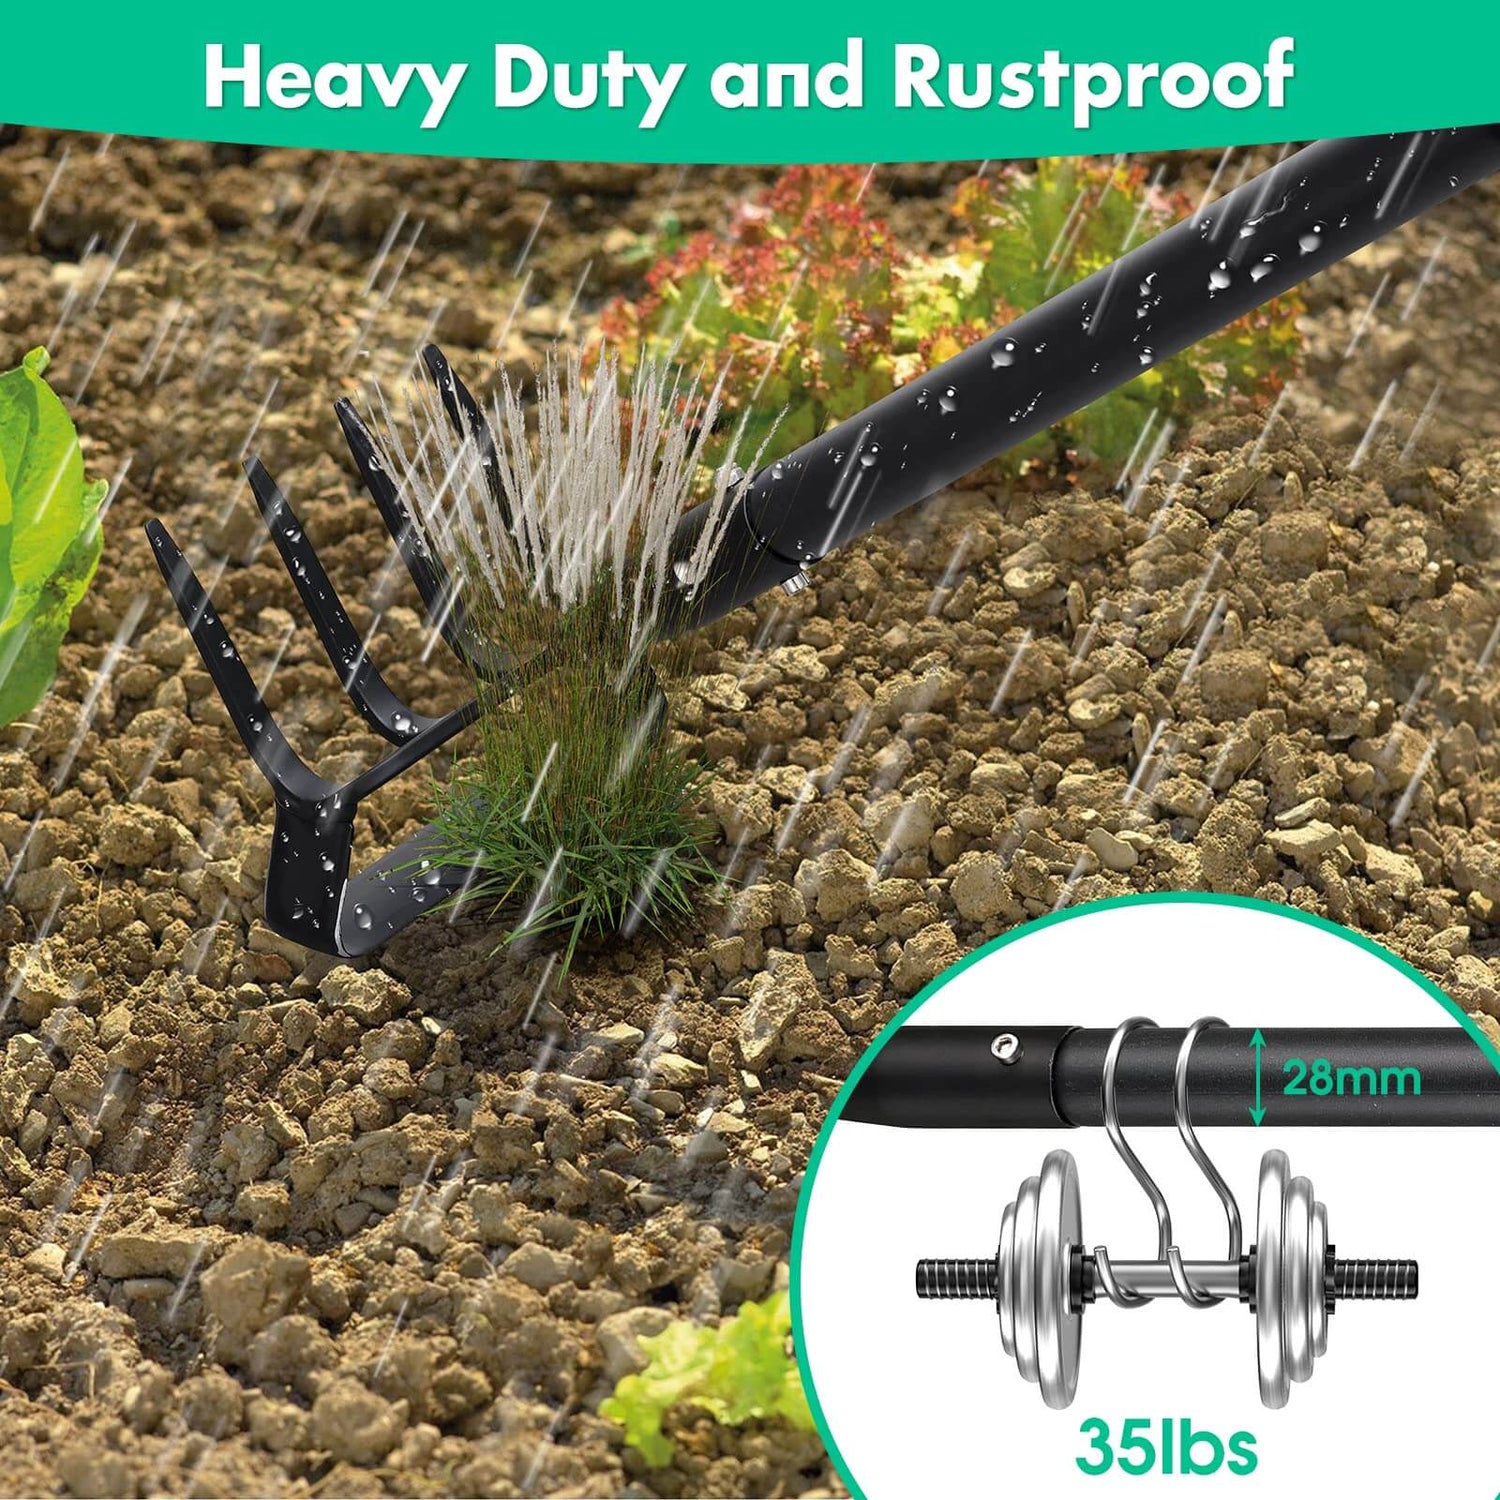 Made from premium 1.3-inch-thick diameter steel, this heavy-duty garden tool is Sturdy and Rust-Resistant, and designed to withstand the toughest roots, bricks, and soil, it resists bending, cracking, or falling apart.